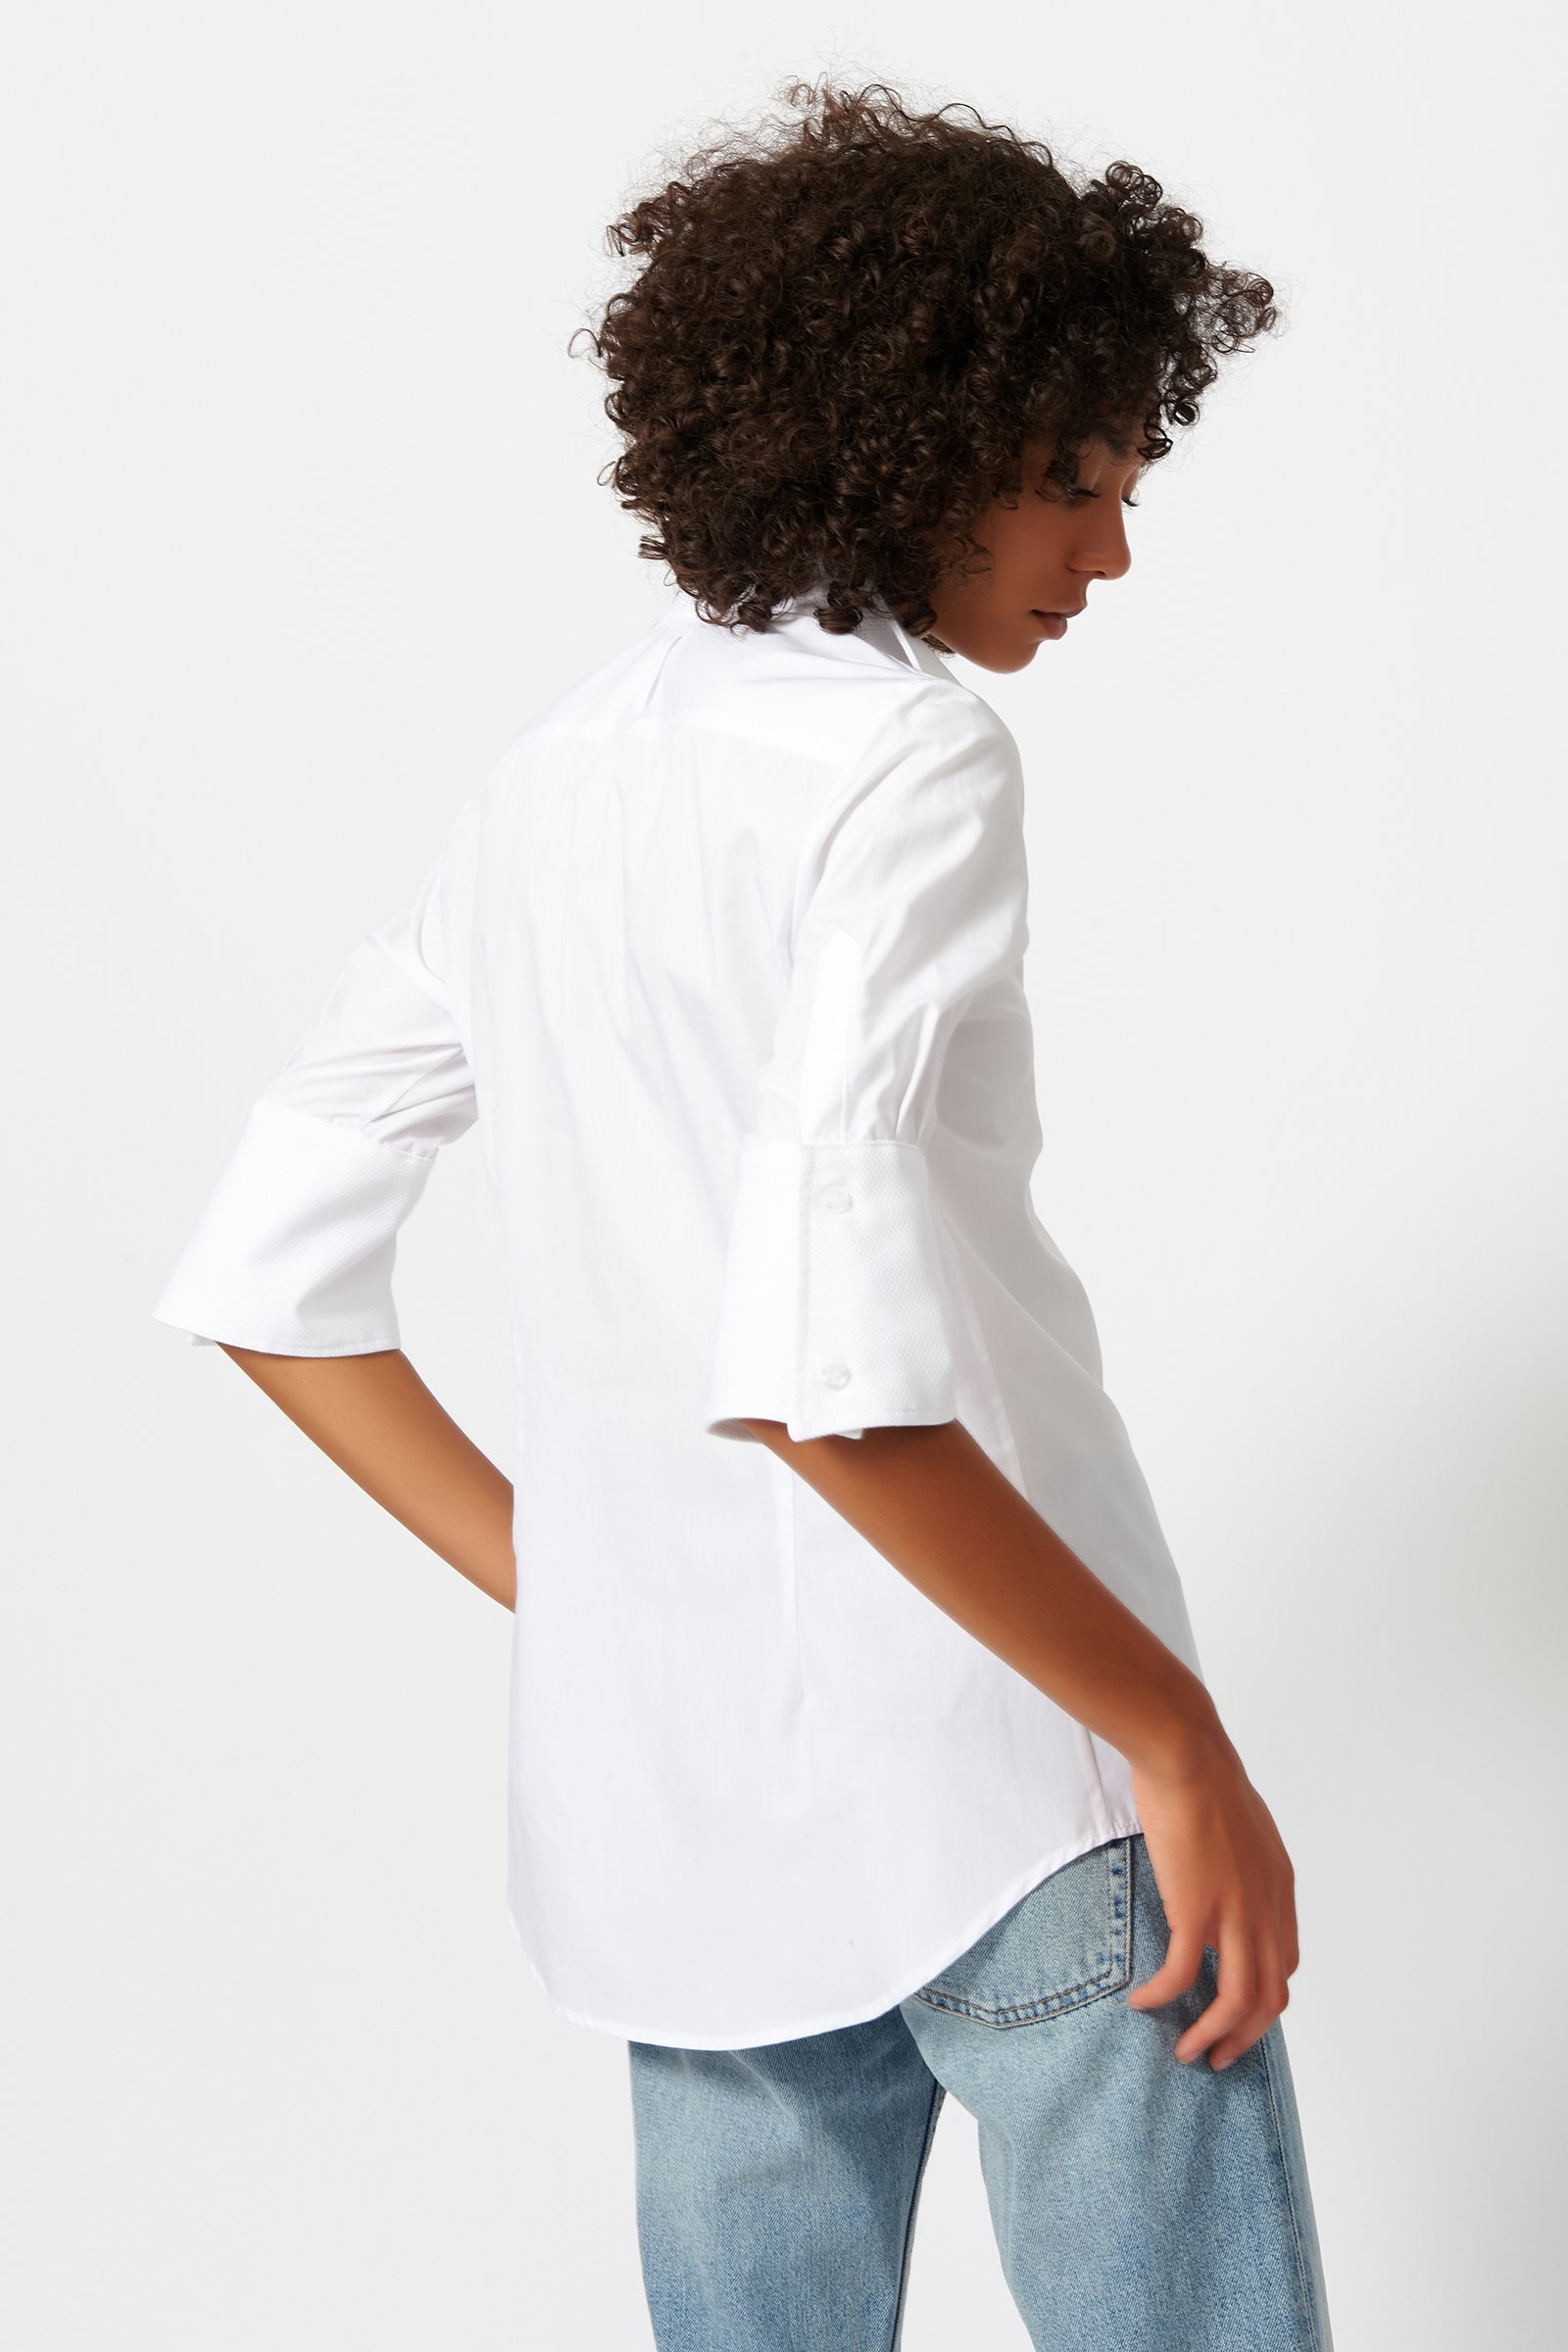 Kal Rieman Double Collar Shirt in White Poplin with Pique on Model Back View